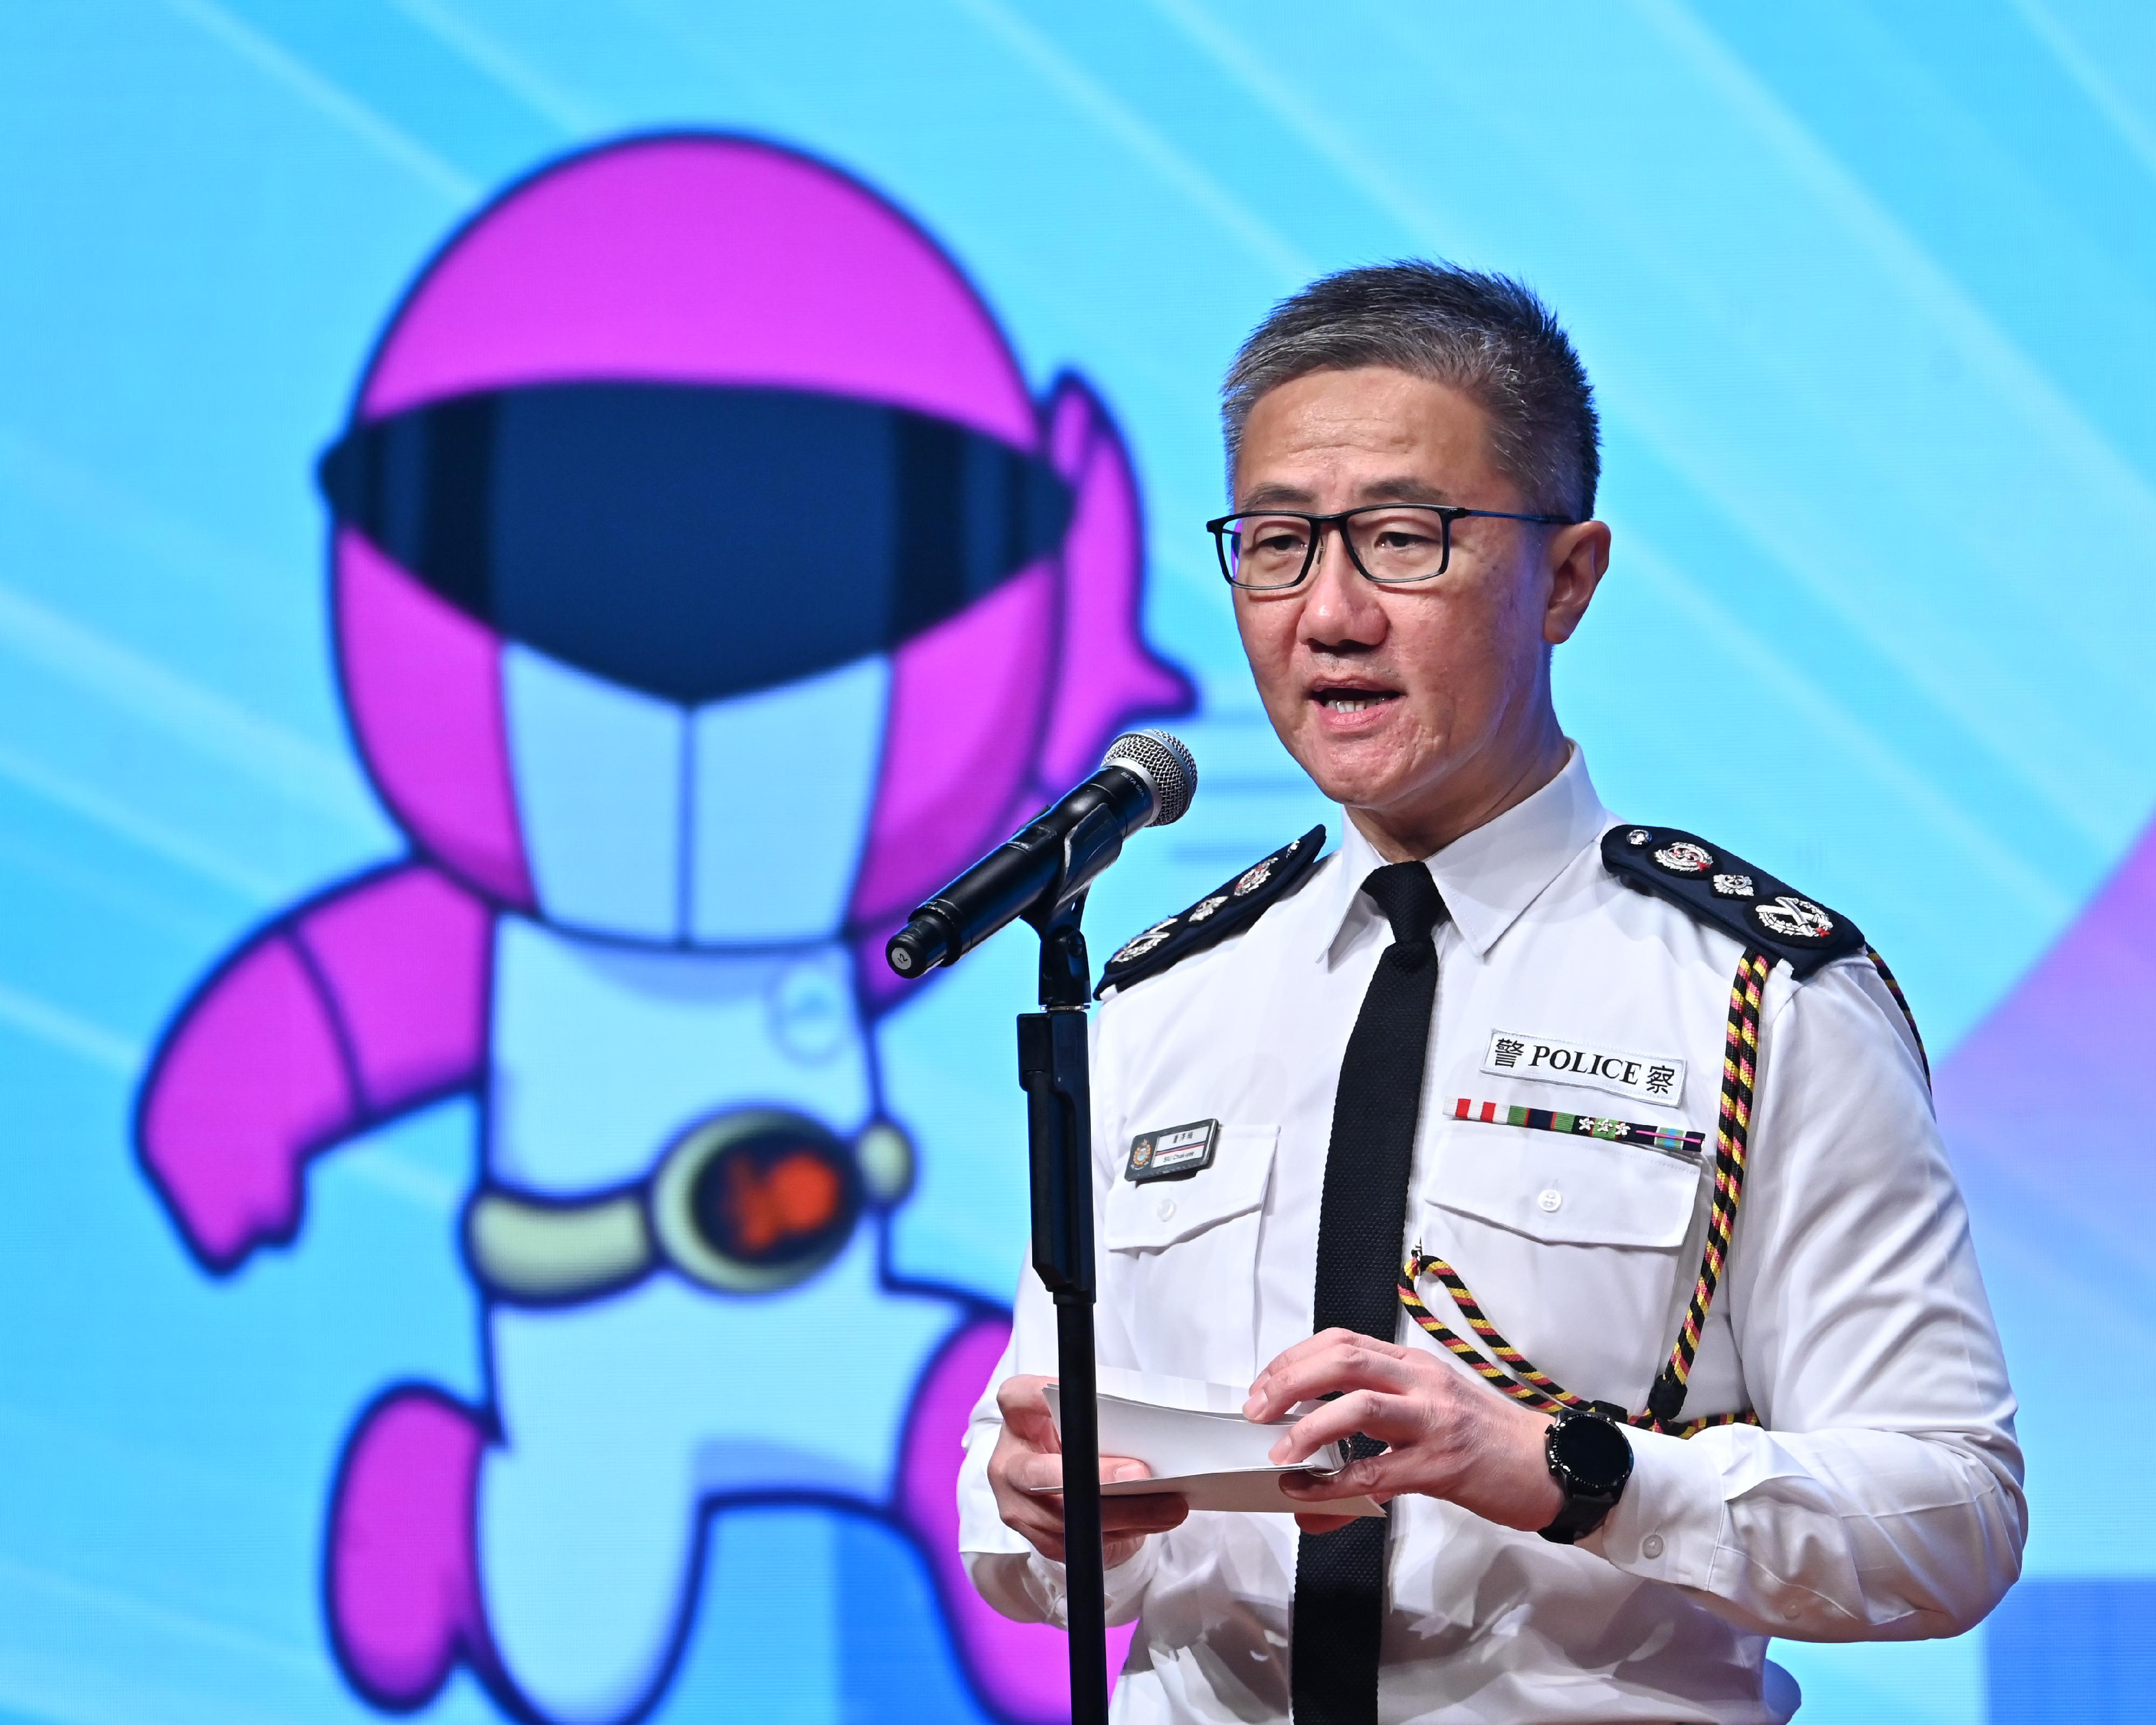 The Good Citizen Award 2022 cum 50th Anniversary Presentation Ceremony was held today (February 26). Picture shows the Commissioner of Police, Mr Siu Chak-yee, addressing at the ceremony. 